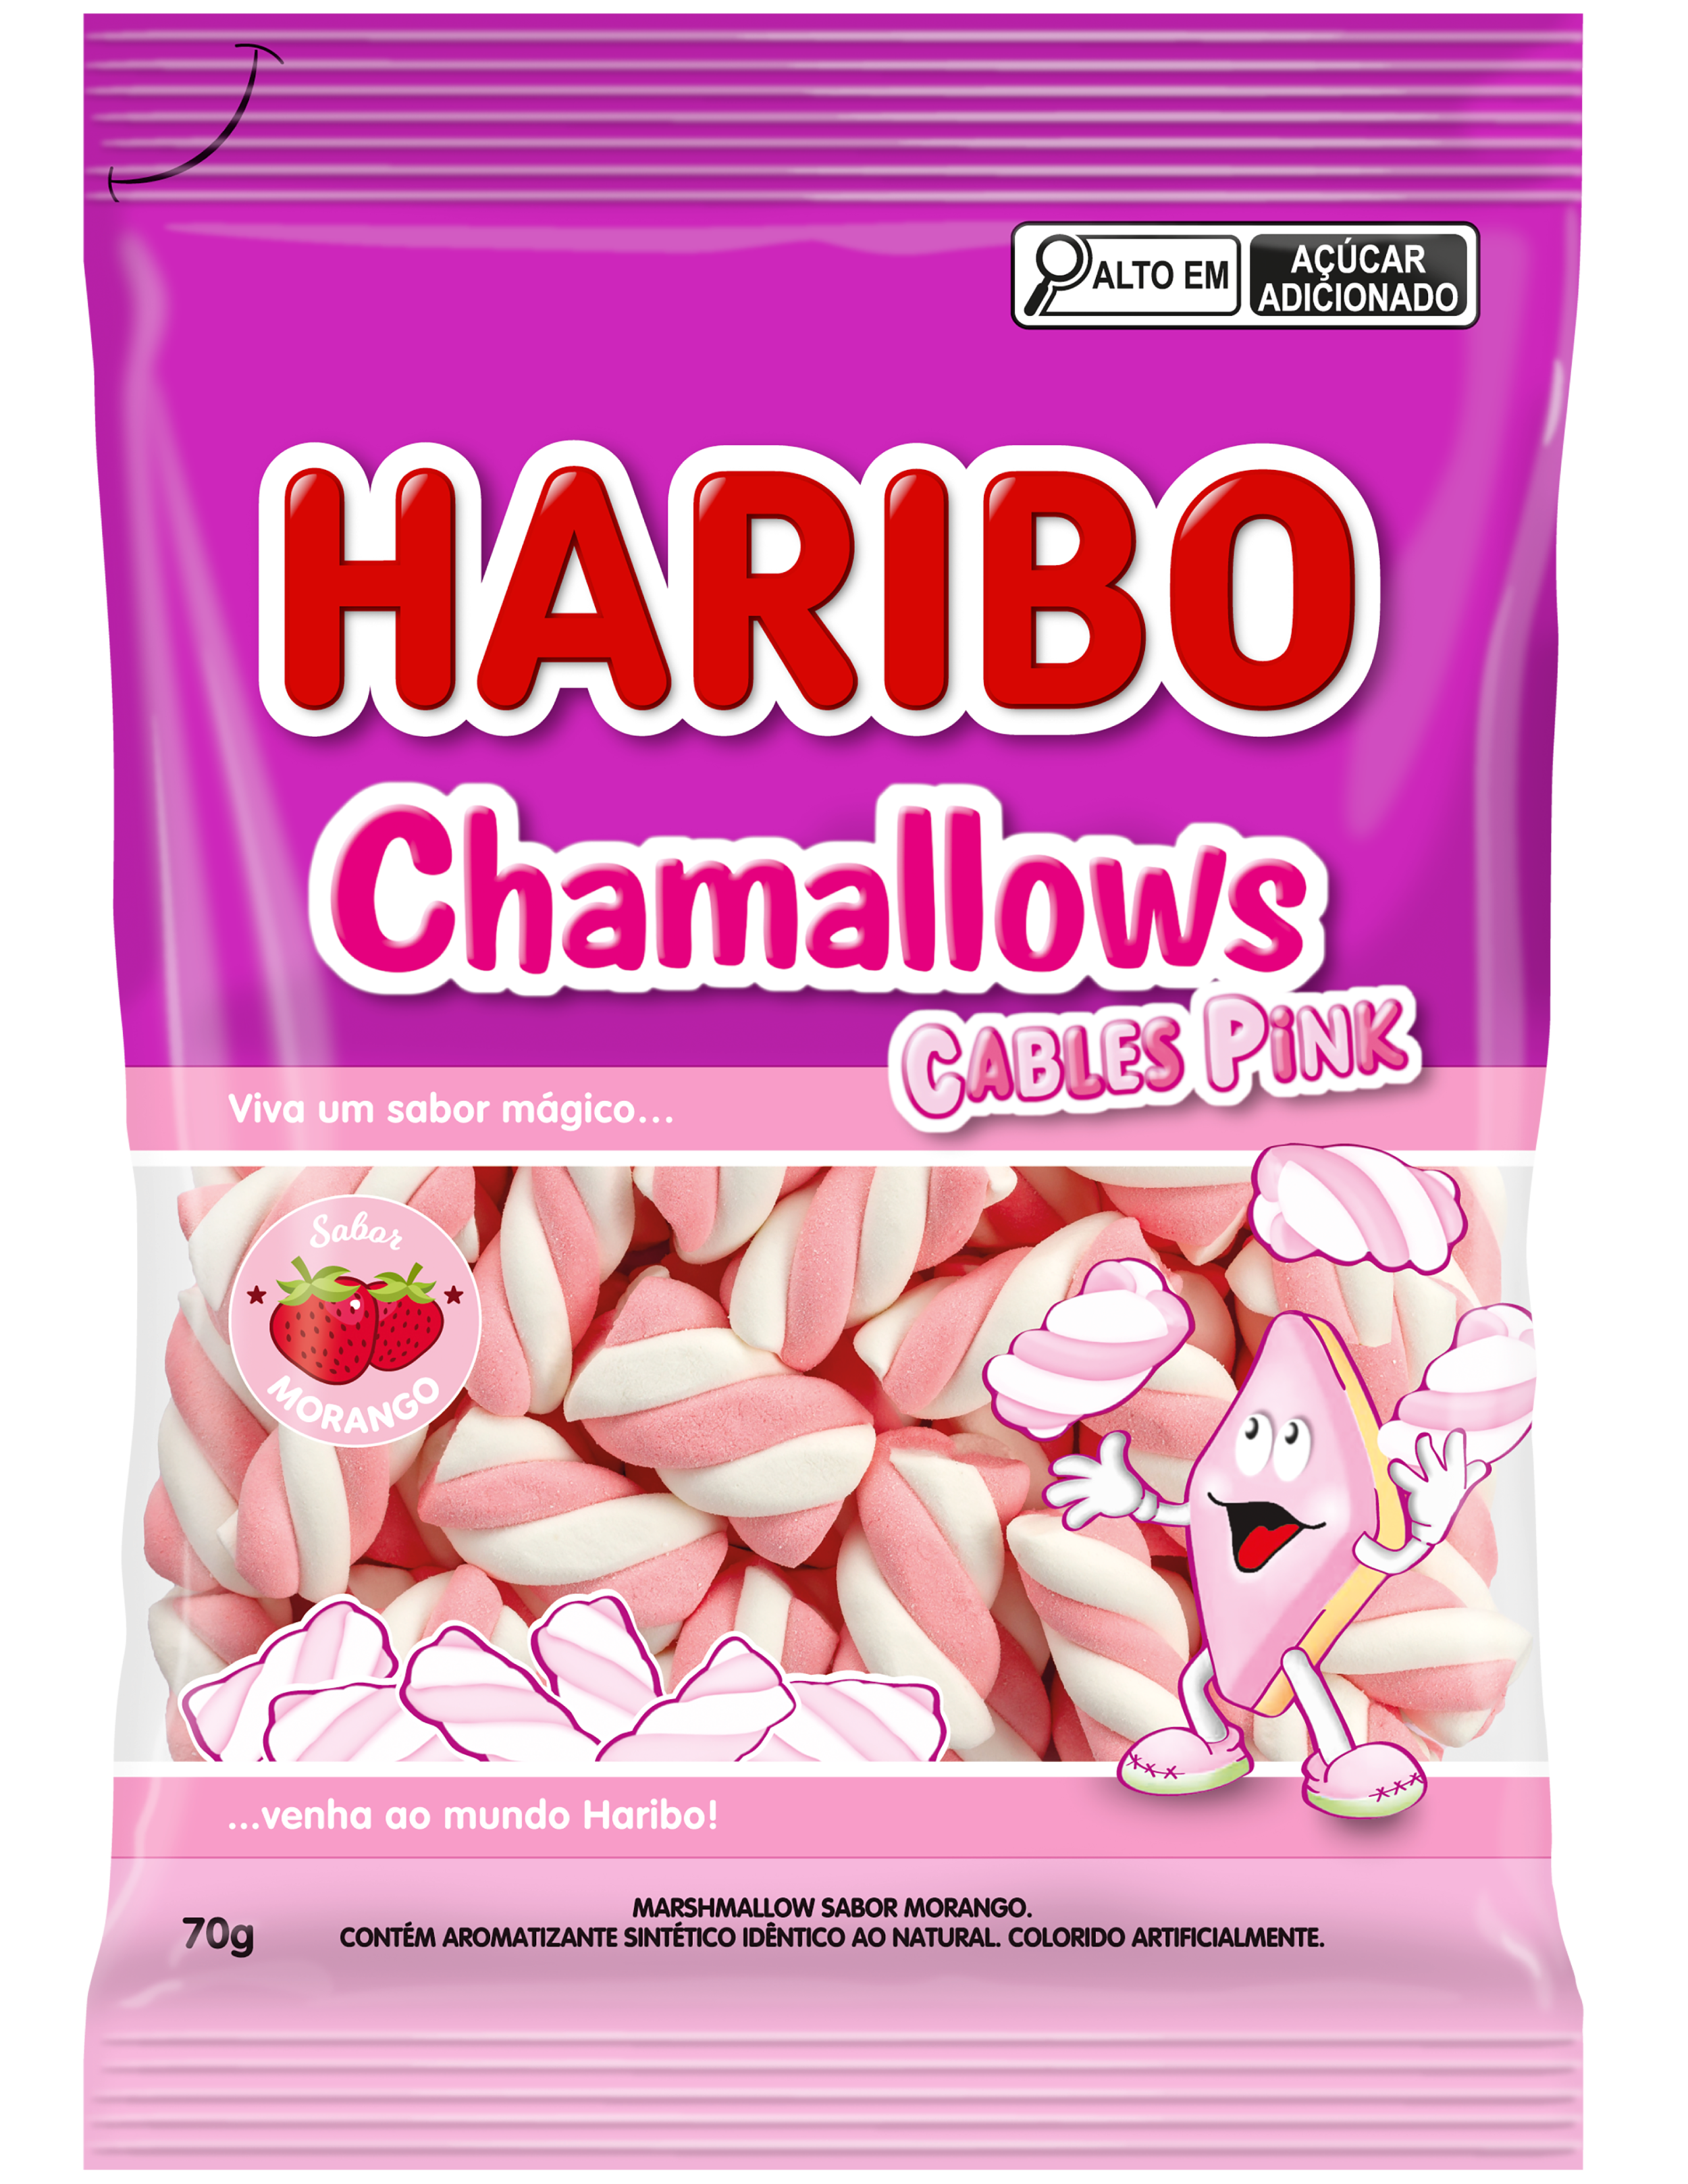 CABLES PINK HARIBO